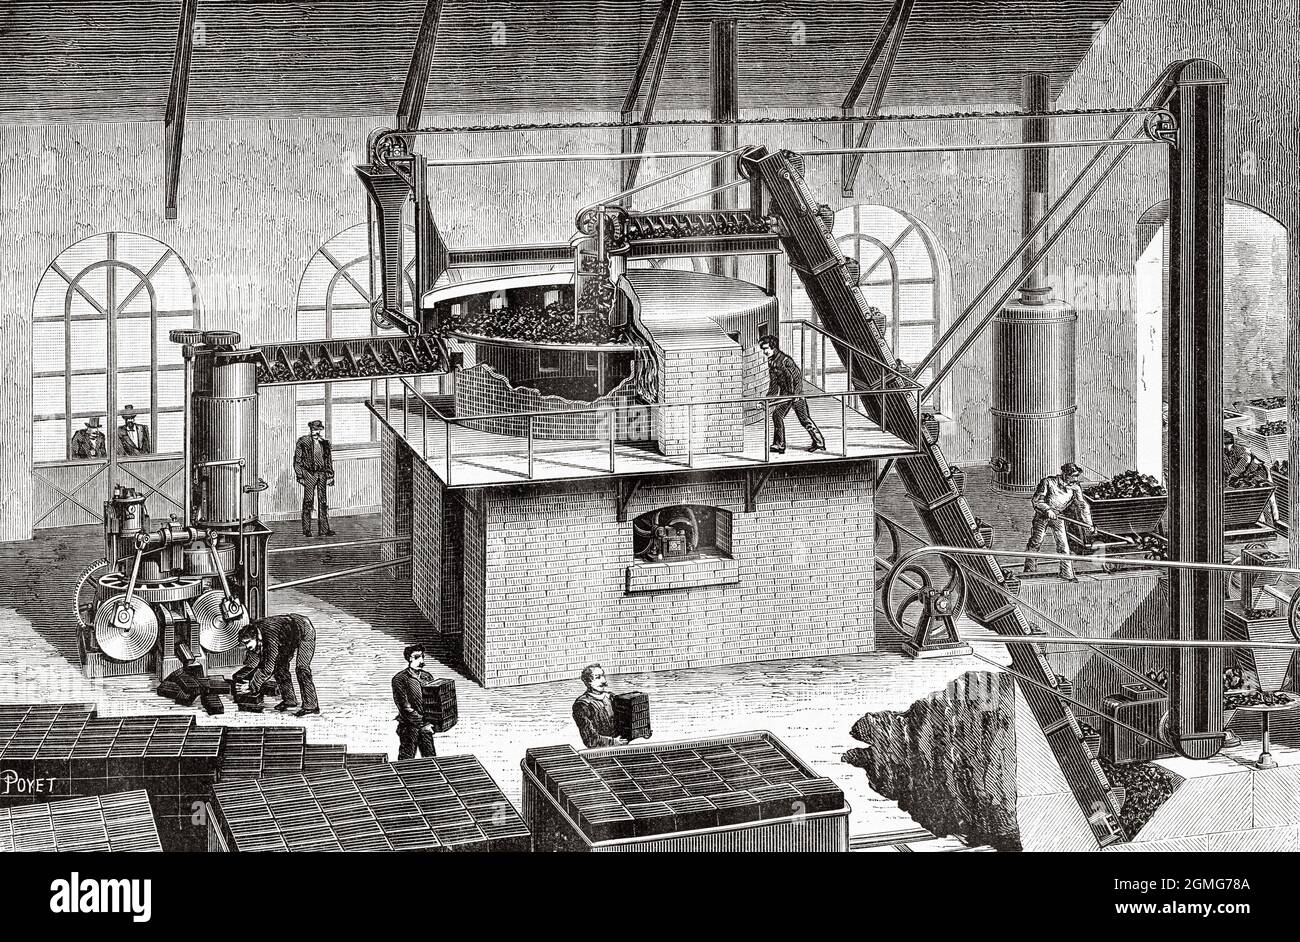 Manufacture of agglomerated fuels, overview of a plant, Beatrix and Couffinhal system. Old 19th century engraved illustration from La Nature 1883 Stock Photo